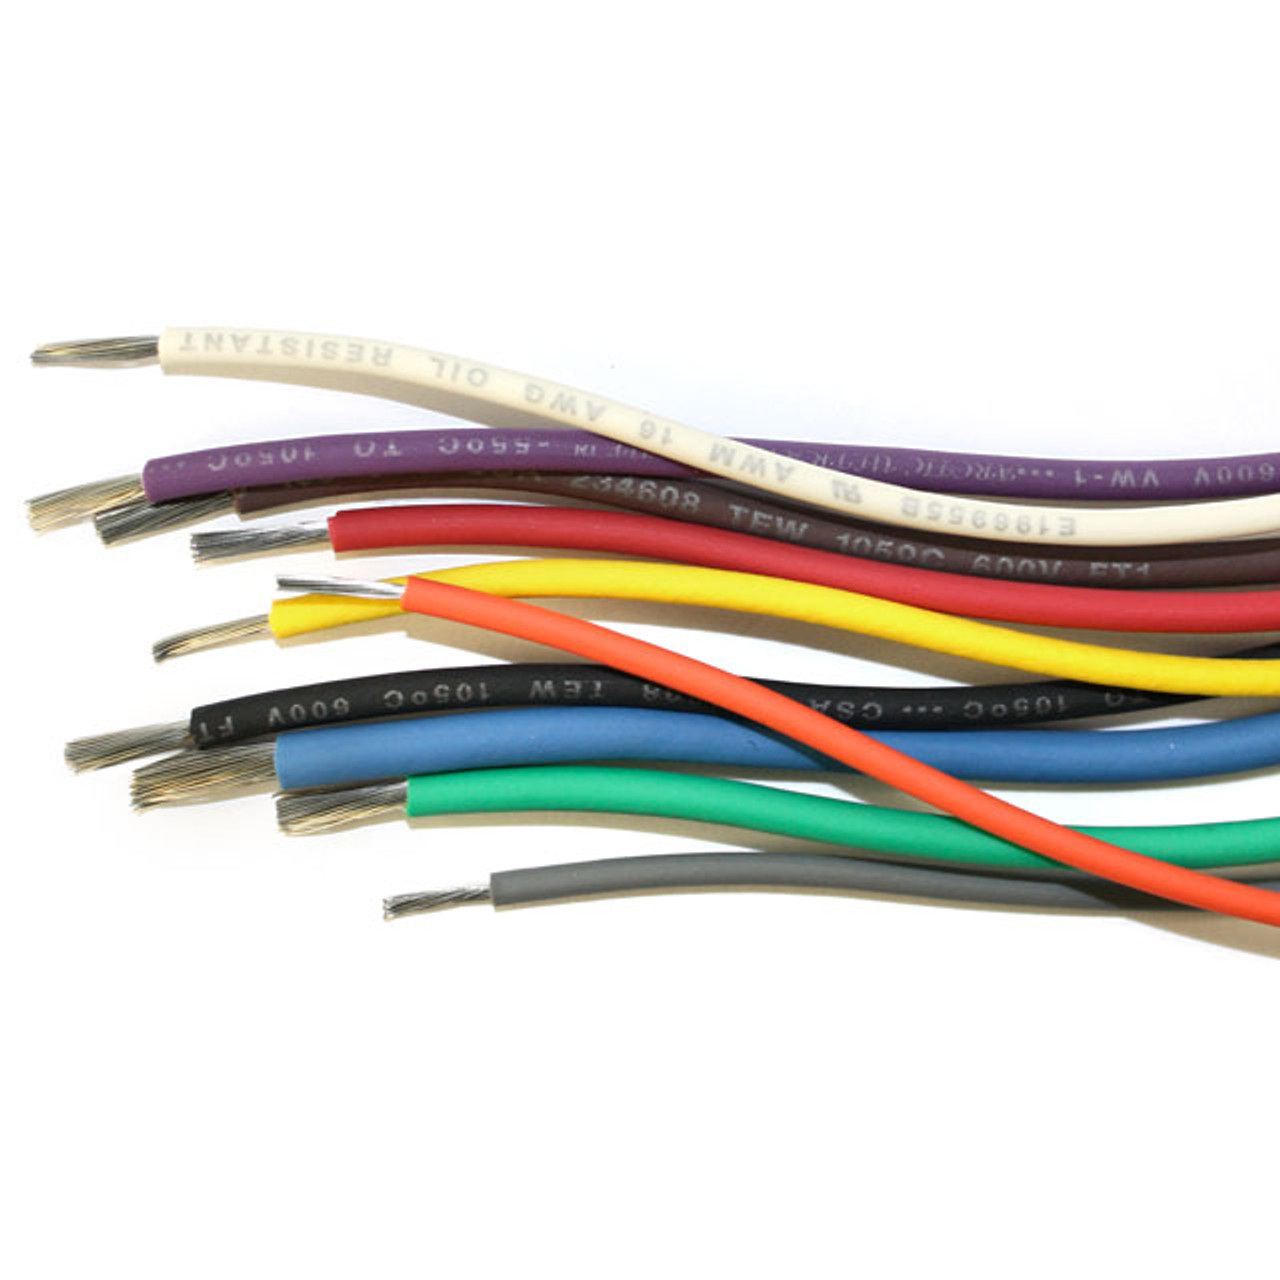 Polar Wire Arctic Ultraflex Blue 10-18 AWG single conductor tinned fine strand wire features a tough, abrasion resistant jacket and is ultra flexible in temperatures to -55°C